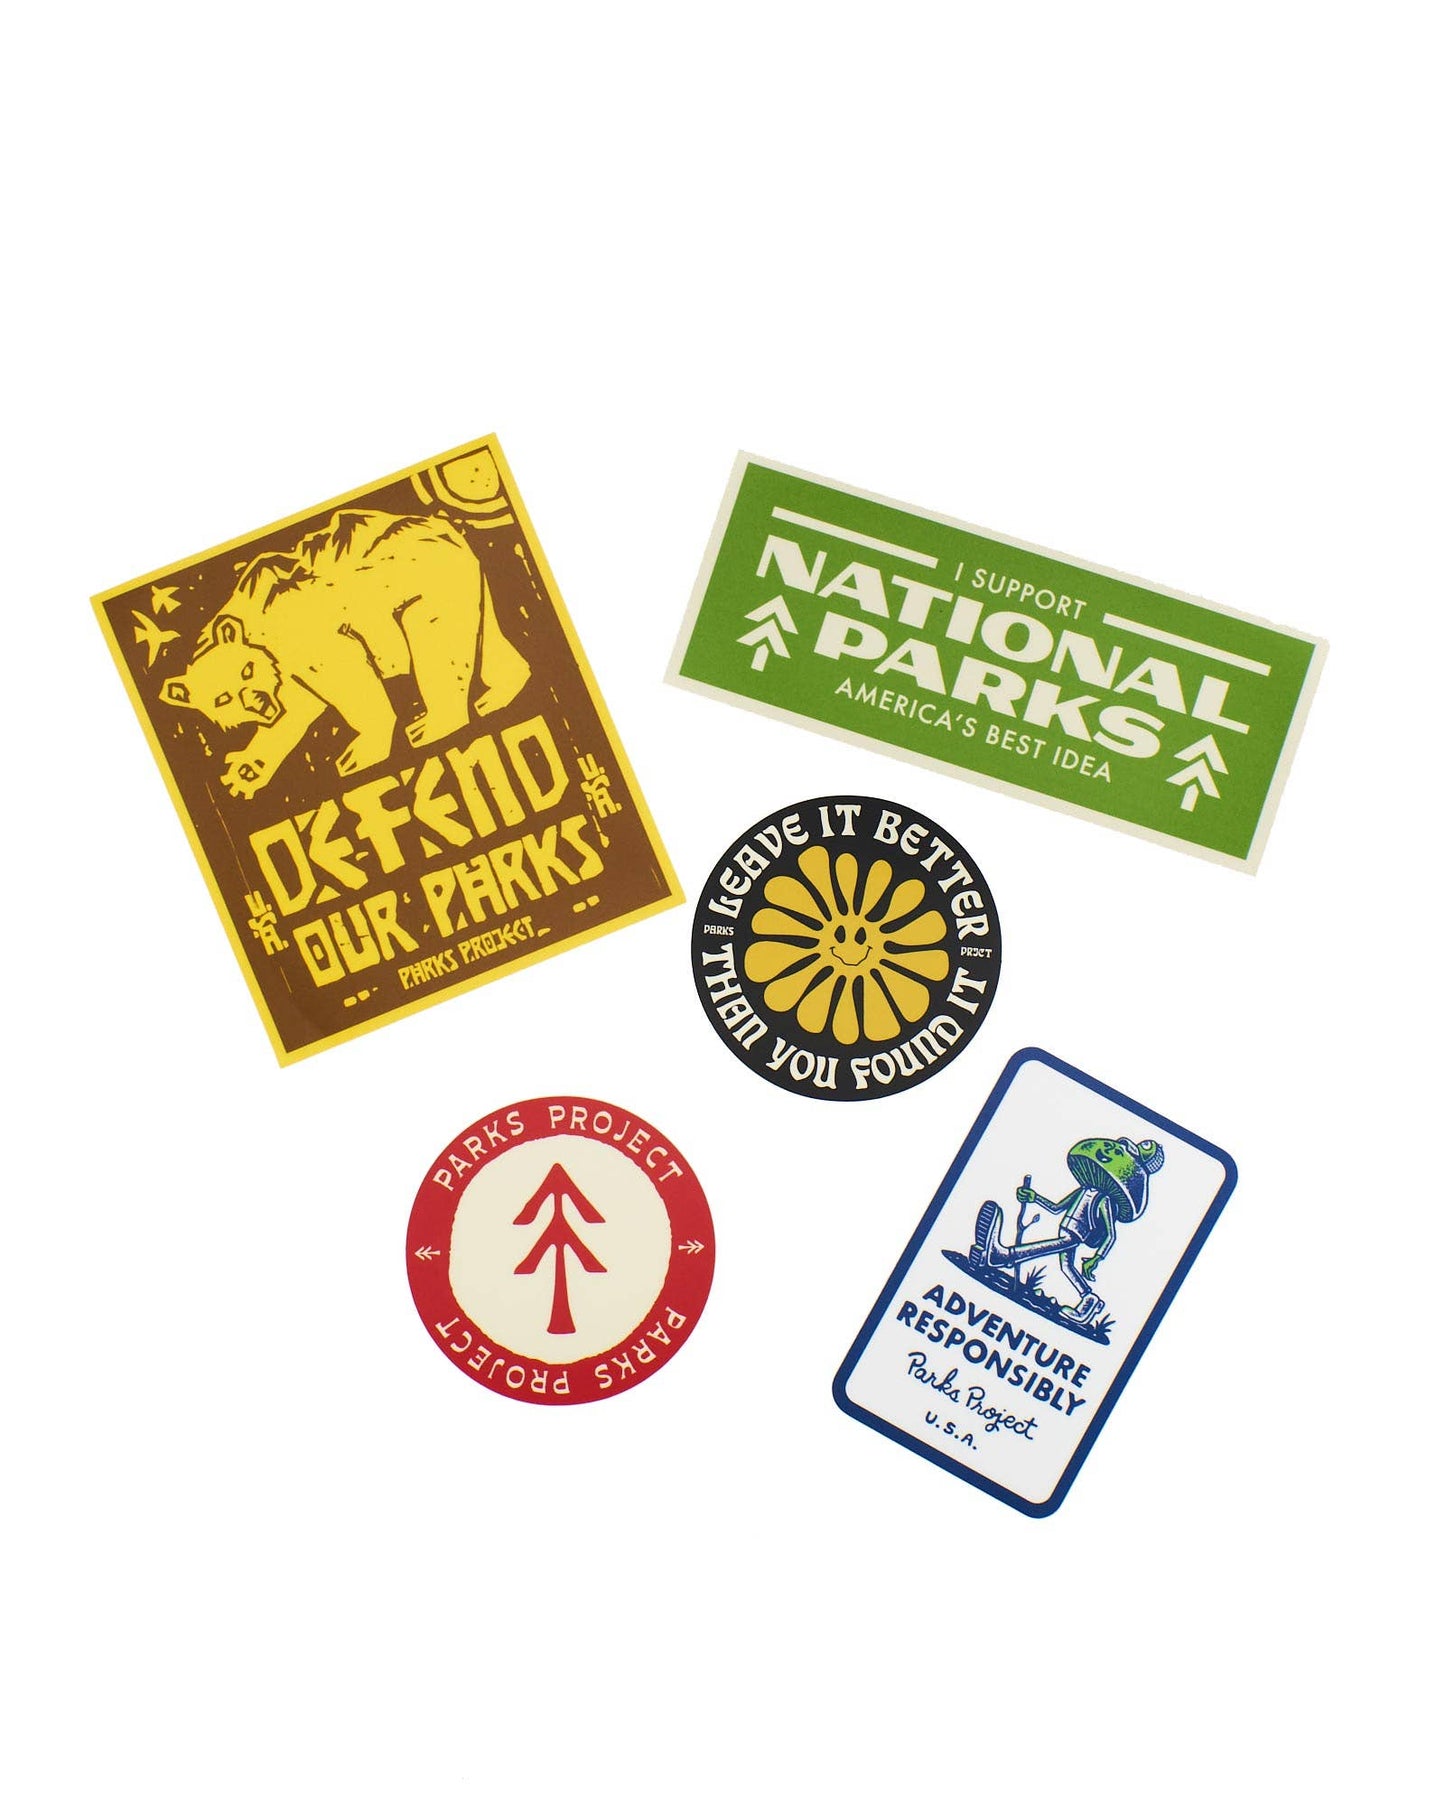 Parks Adventurer Sticker Pack by Parks Project with a variety of five stickers